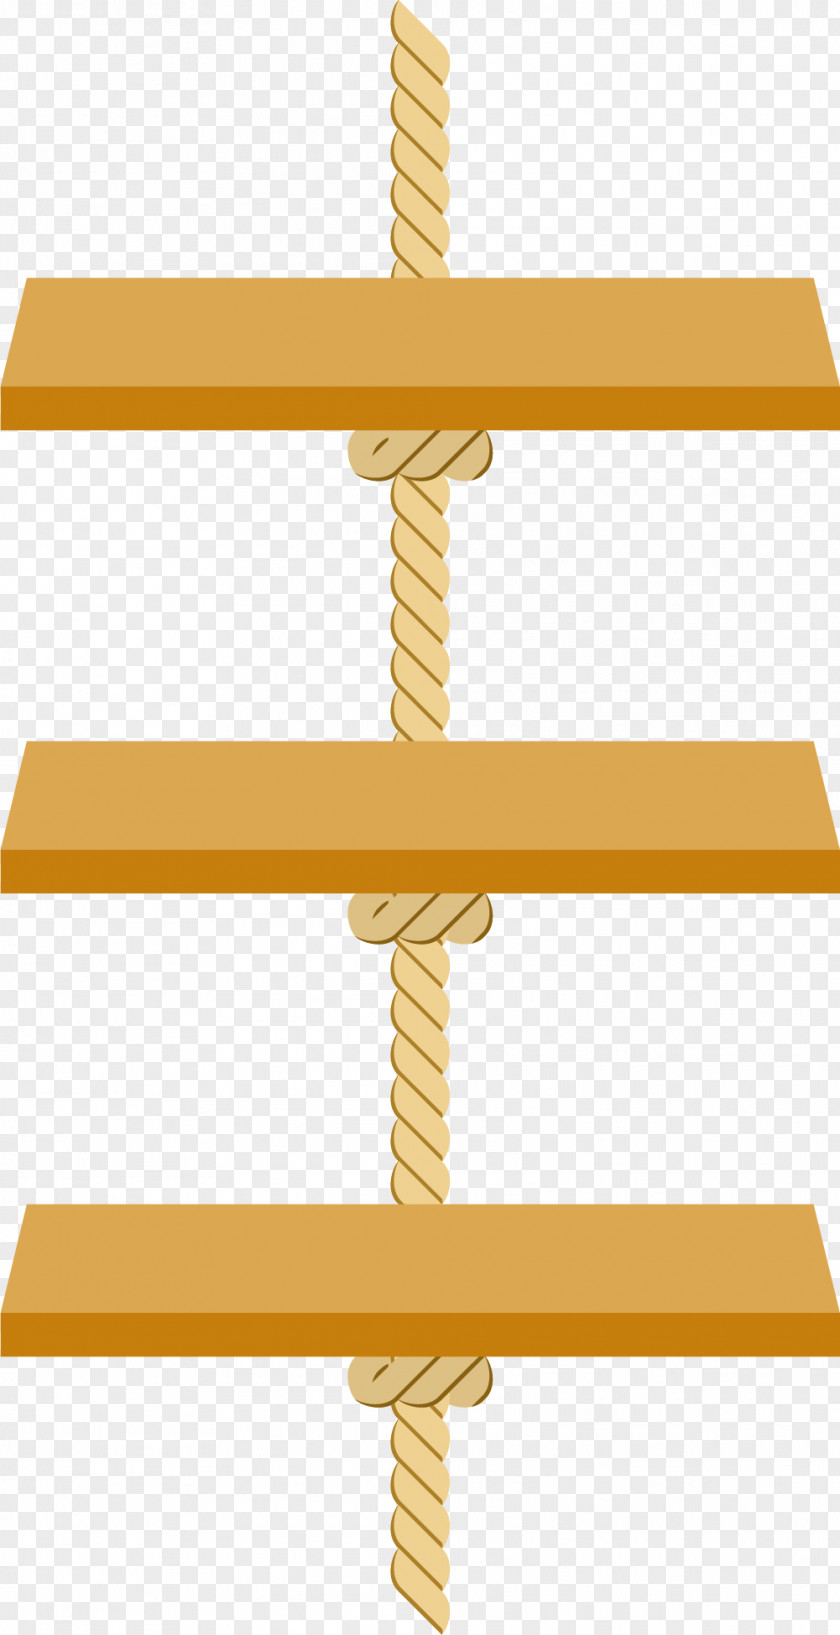 A Straight Ladder Stairs PNG